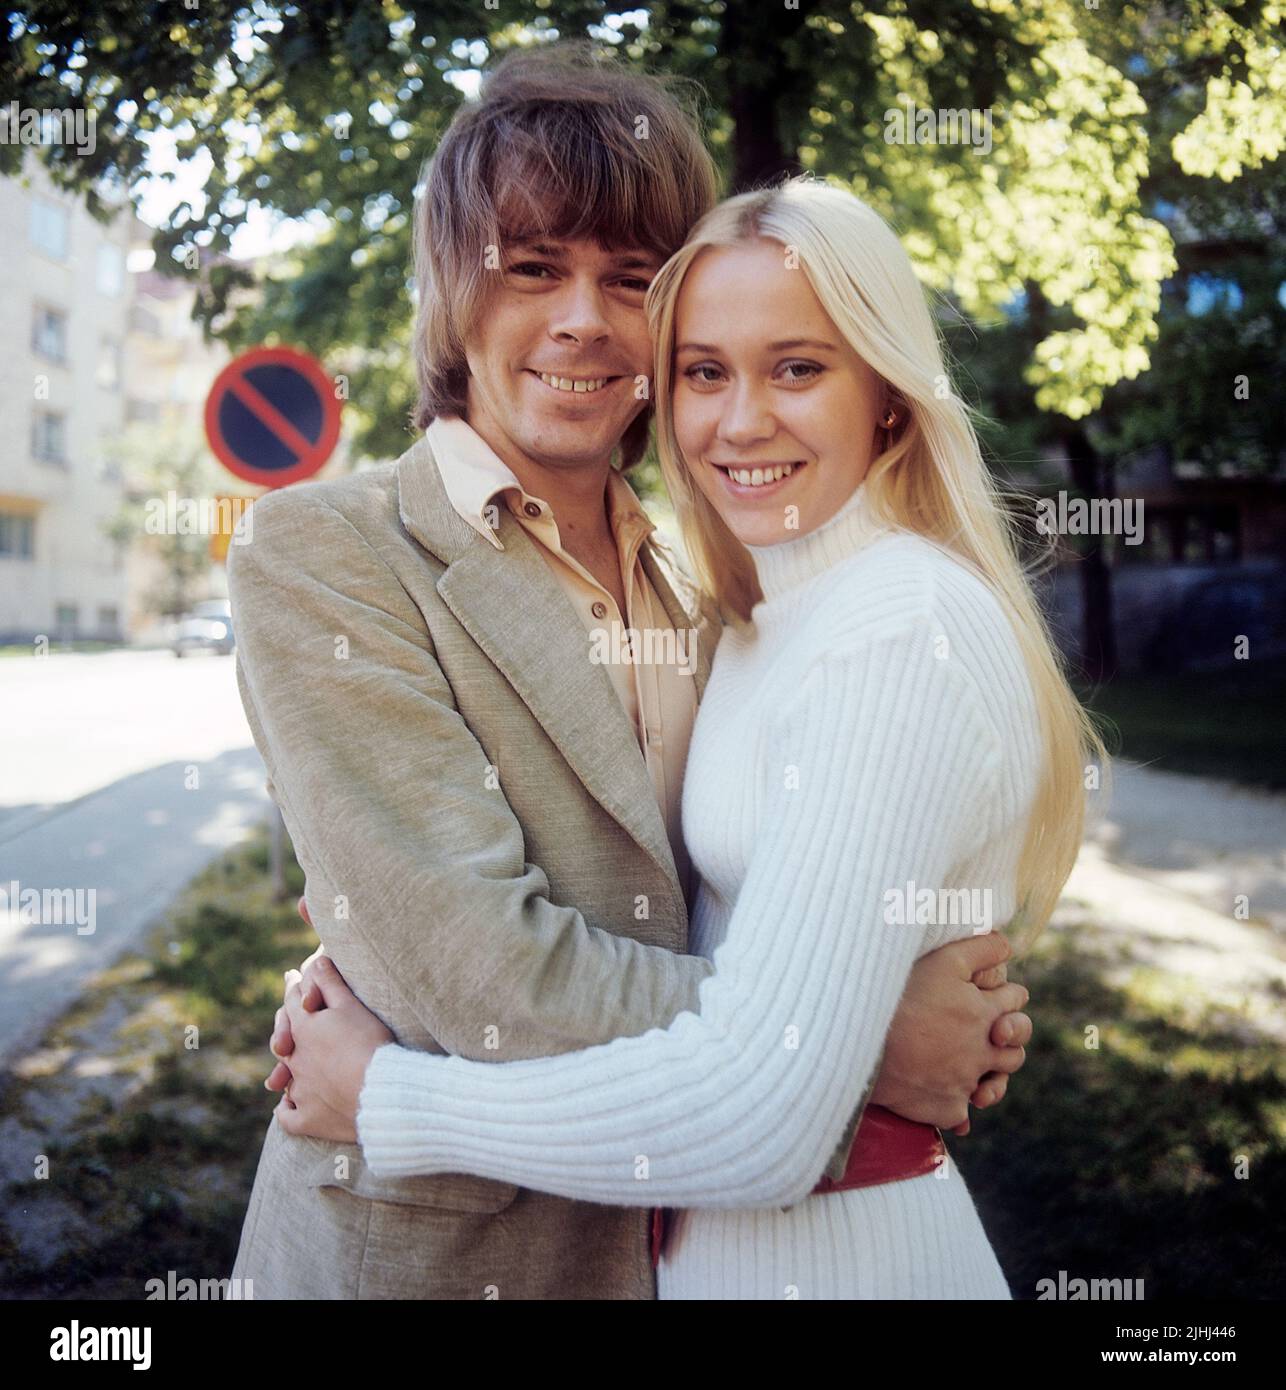 ABBA. Agnetha Fältskog. Singer. Member of the pop group ABBA. Born 1950. Pictured here with her fiance Björn Ulvaeus 1970 whom she married on 6 July 1971. Stock Photo